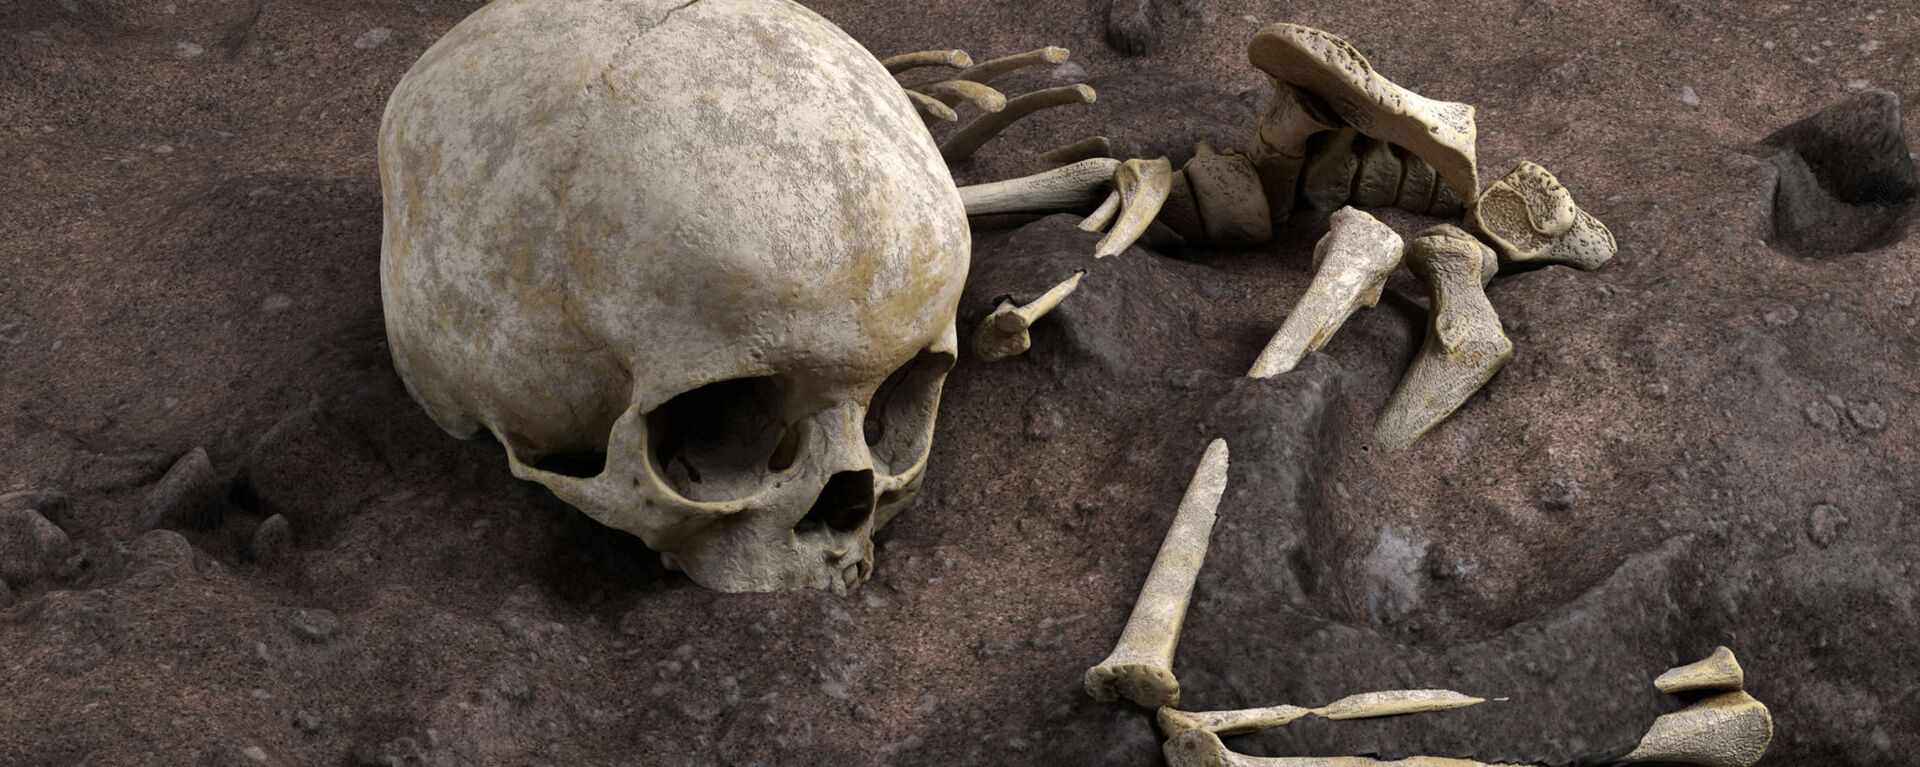 This handout computer-generated image released on May 4, 2021 by the CNRS-University of Bordeaux, shows the remains of a 3-year-old child named by the scientists Mtoto (meaning 'child' in Swahili) and buried inside a deliberately dug pit, were discovered by archaelogists. - The discovery of the oldest burial site in Africa, dated at 78,000 years old, has just been revealed in the journal Nature by an international team including several researchers from the CNRS - Sputnik International, 1920, 07.05.2021